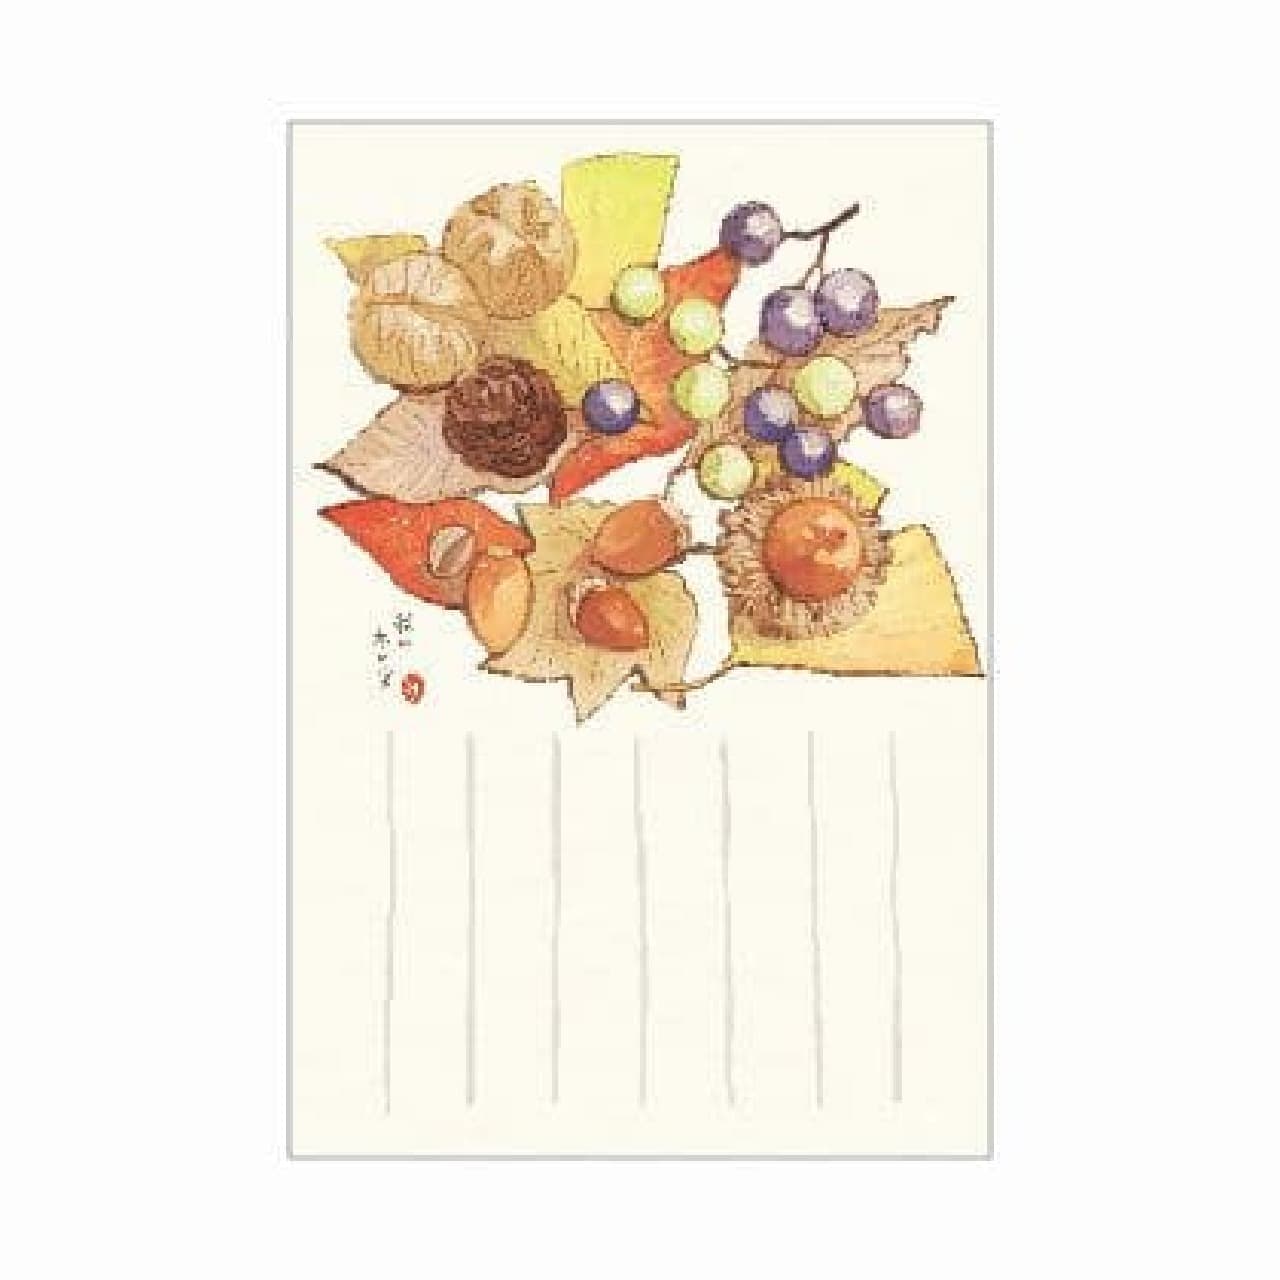 Post Office, "Pictured Postcard 2022 Autumn Pattern"